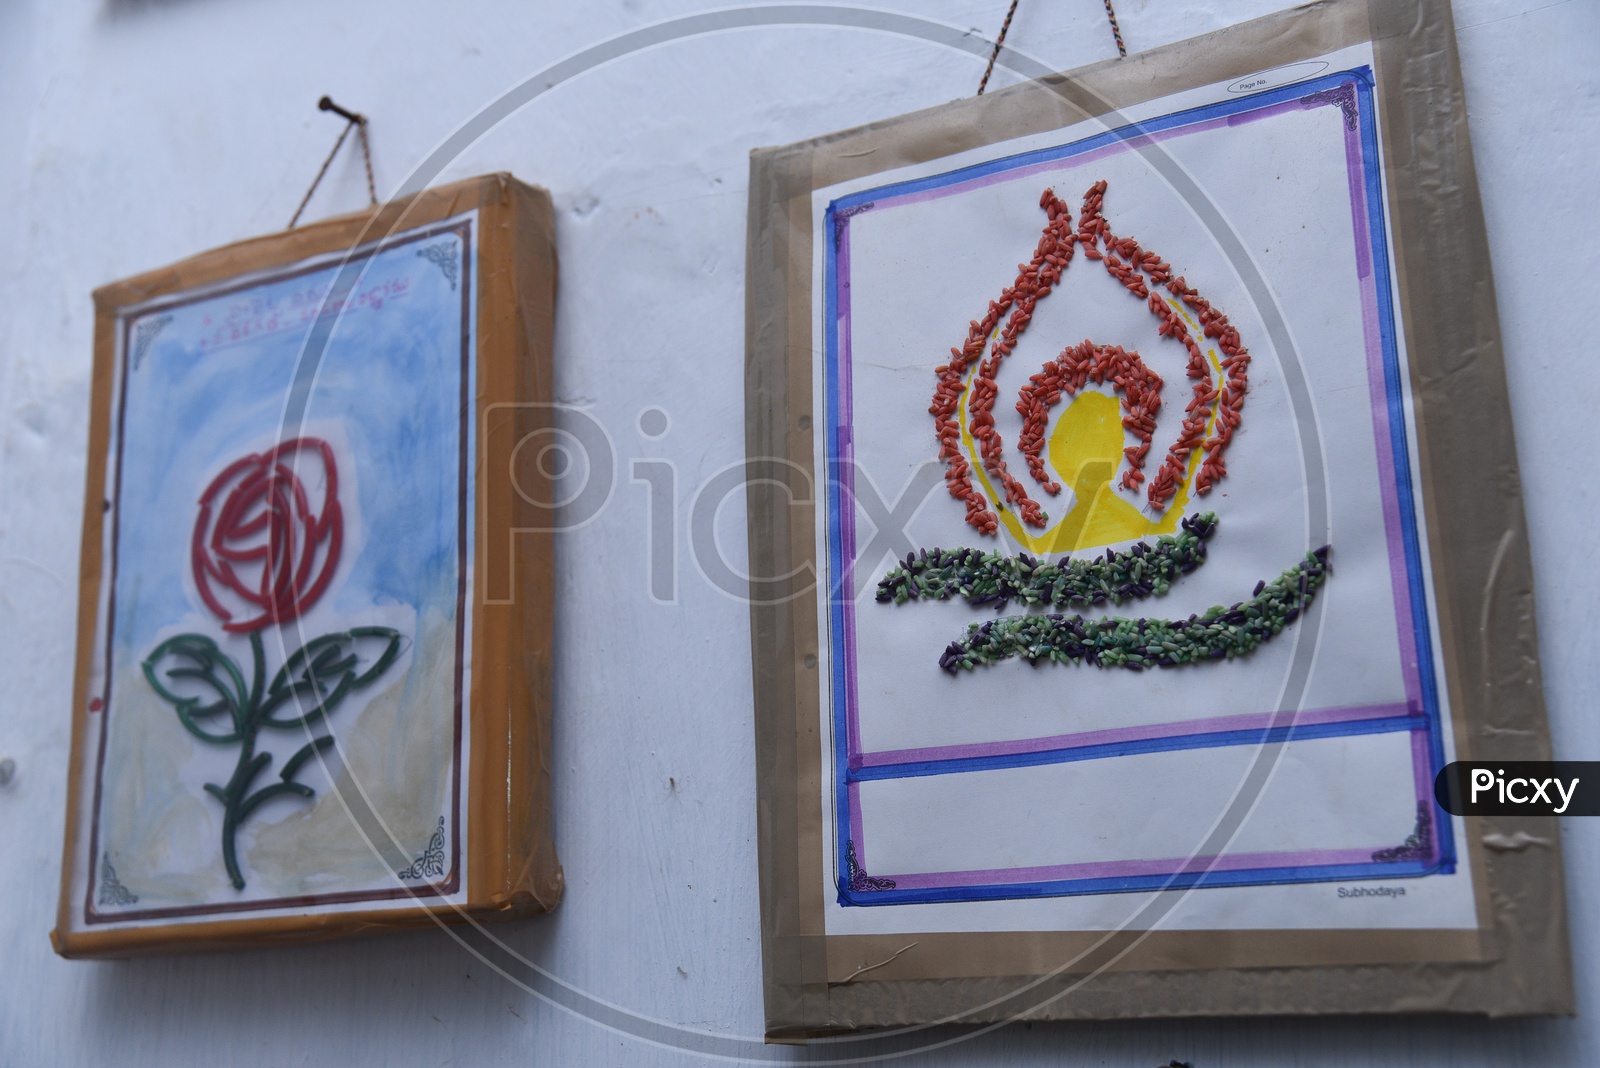 Art by government primary school students using broken bangles and rice grains